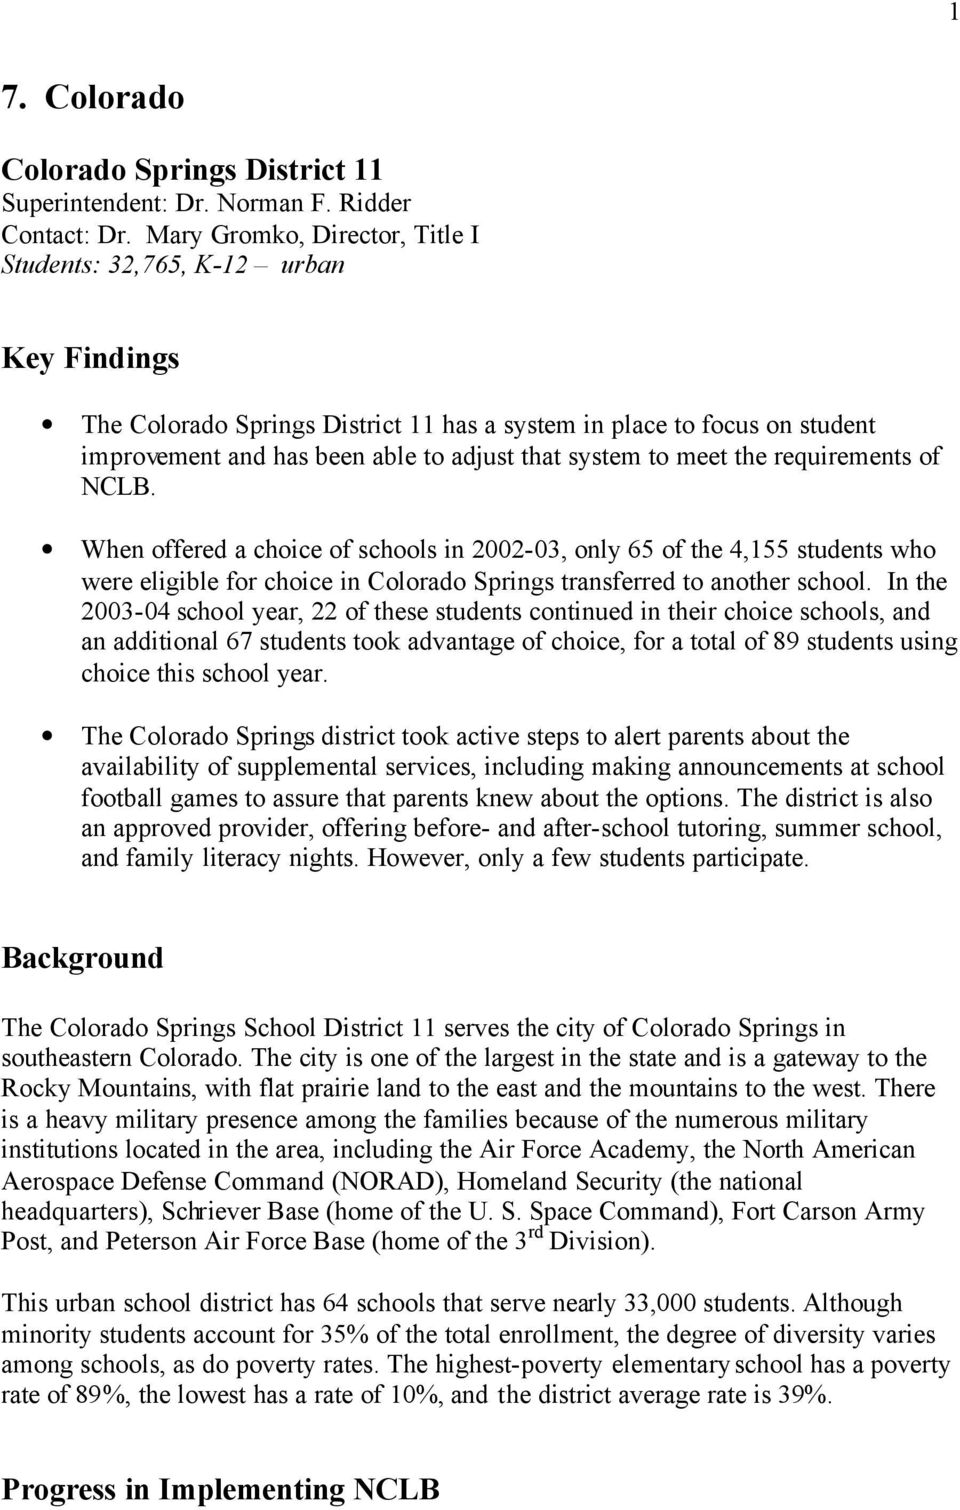 to meet the requirements of NCLB. When offered a choice of schools in 2002-03, only 65 of the 4,155 students who were eligible for choice in Colorado Springs transferred to another school.